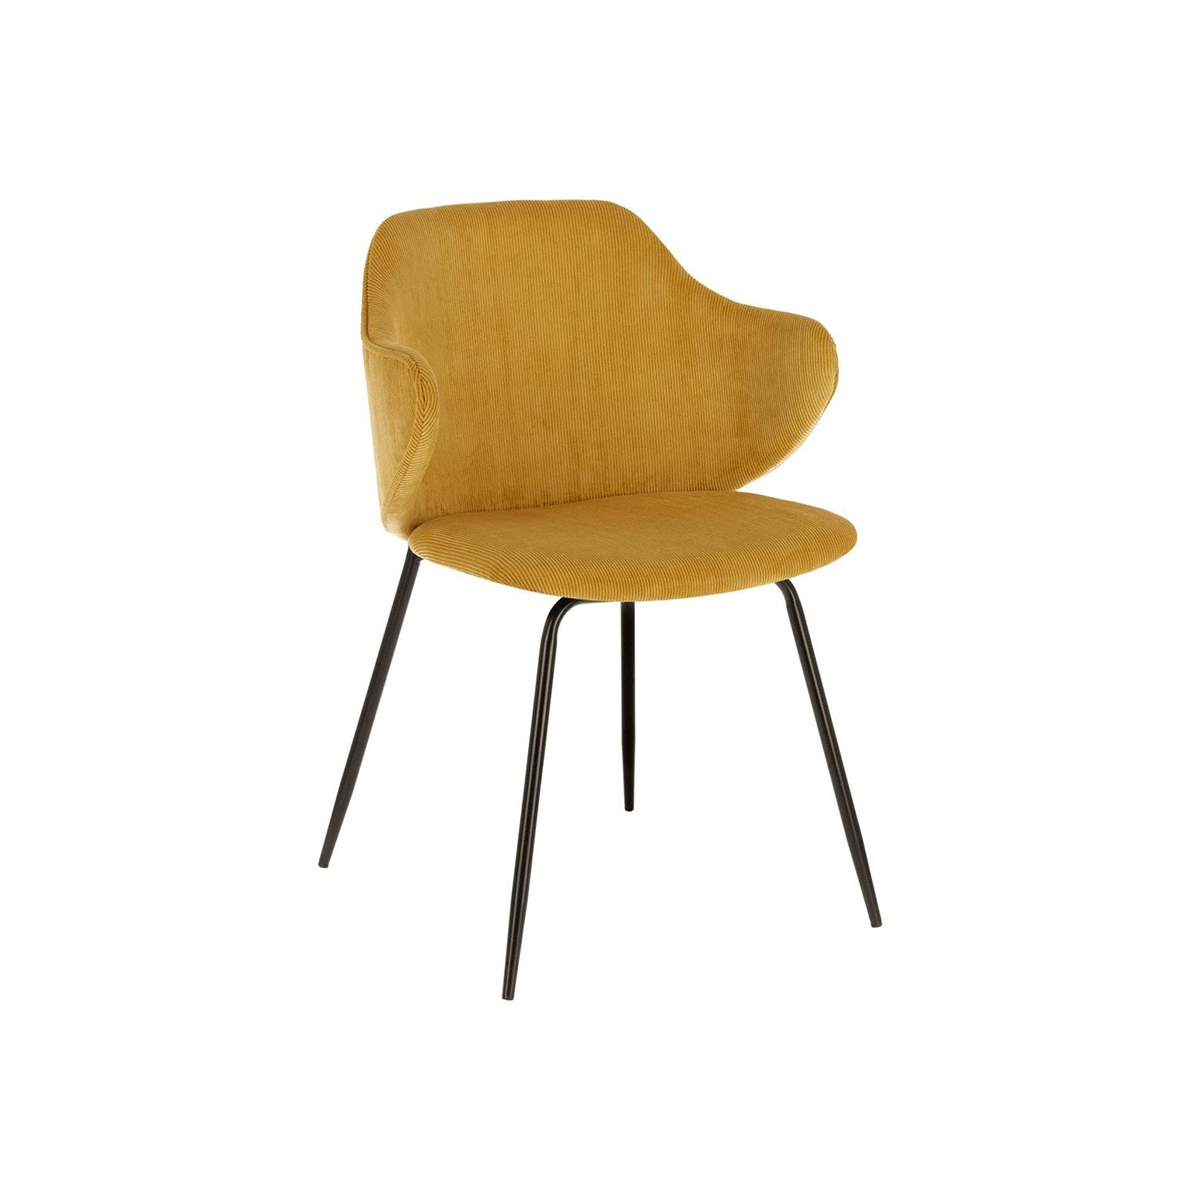 FondHouse Butte Fabric Dining Chair in Mustard Corduroy